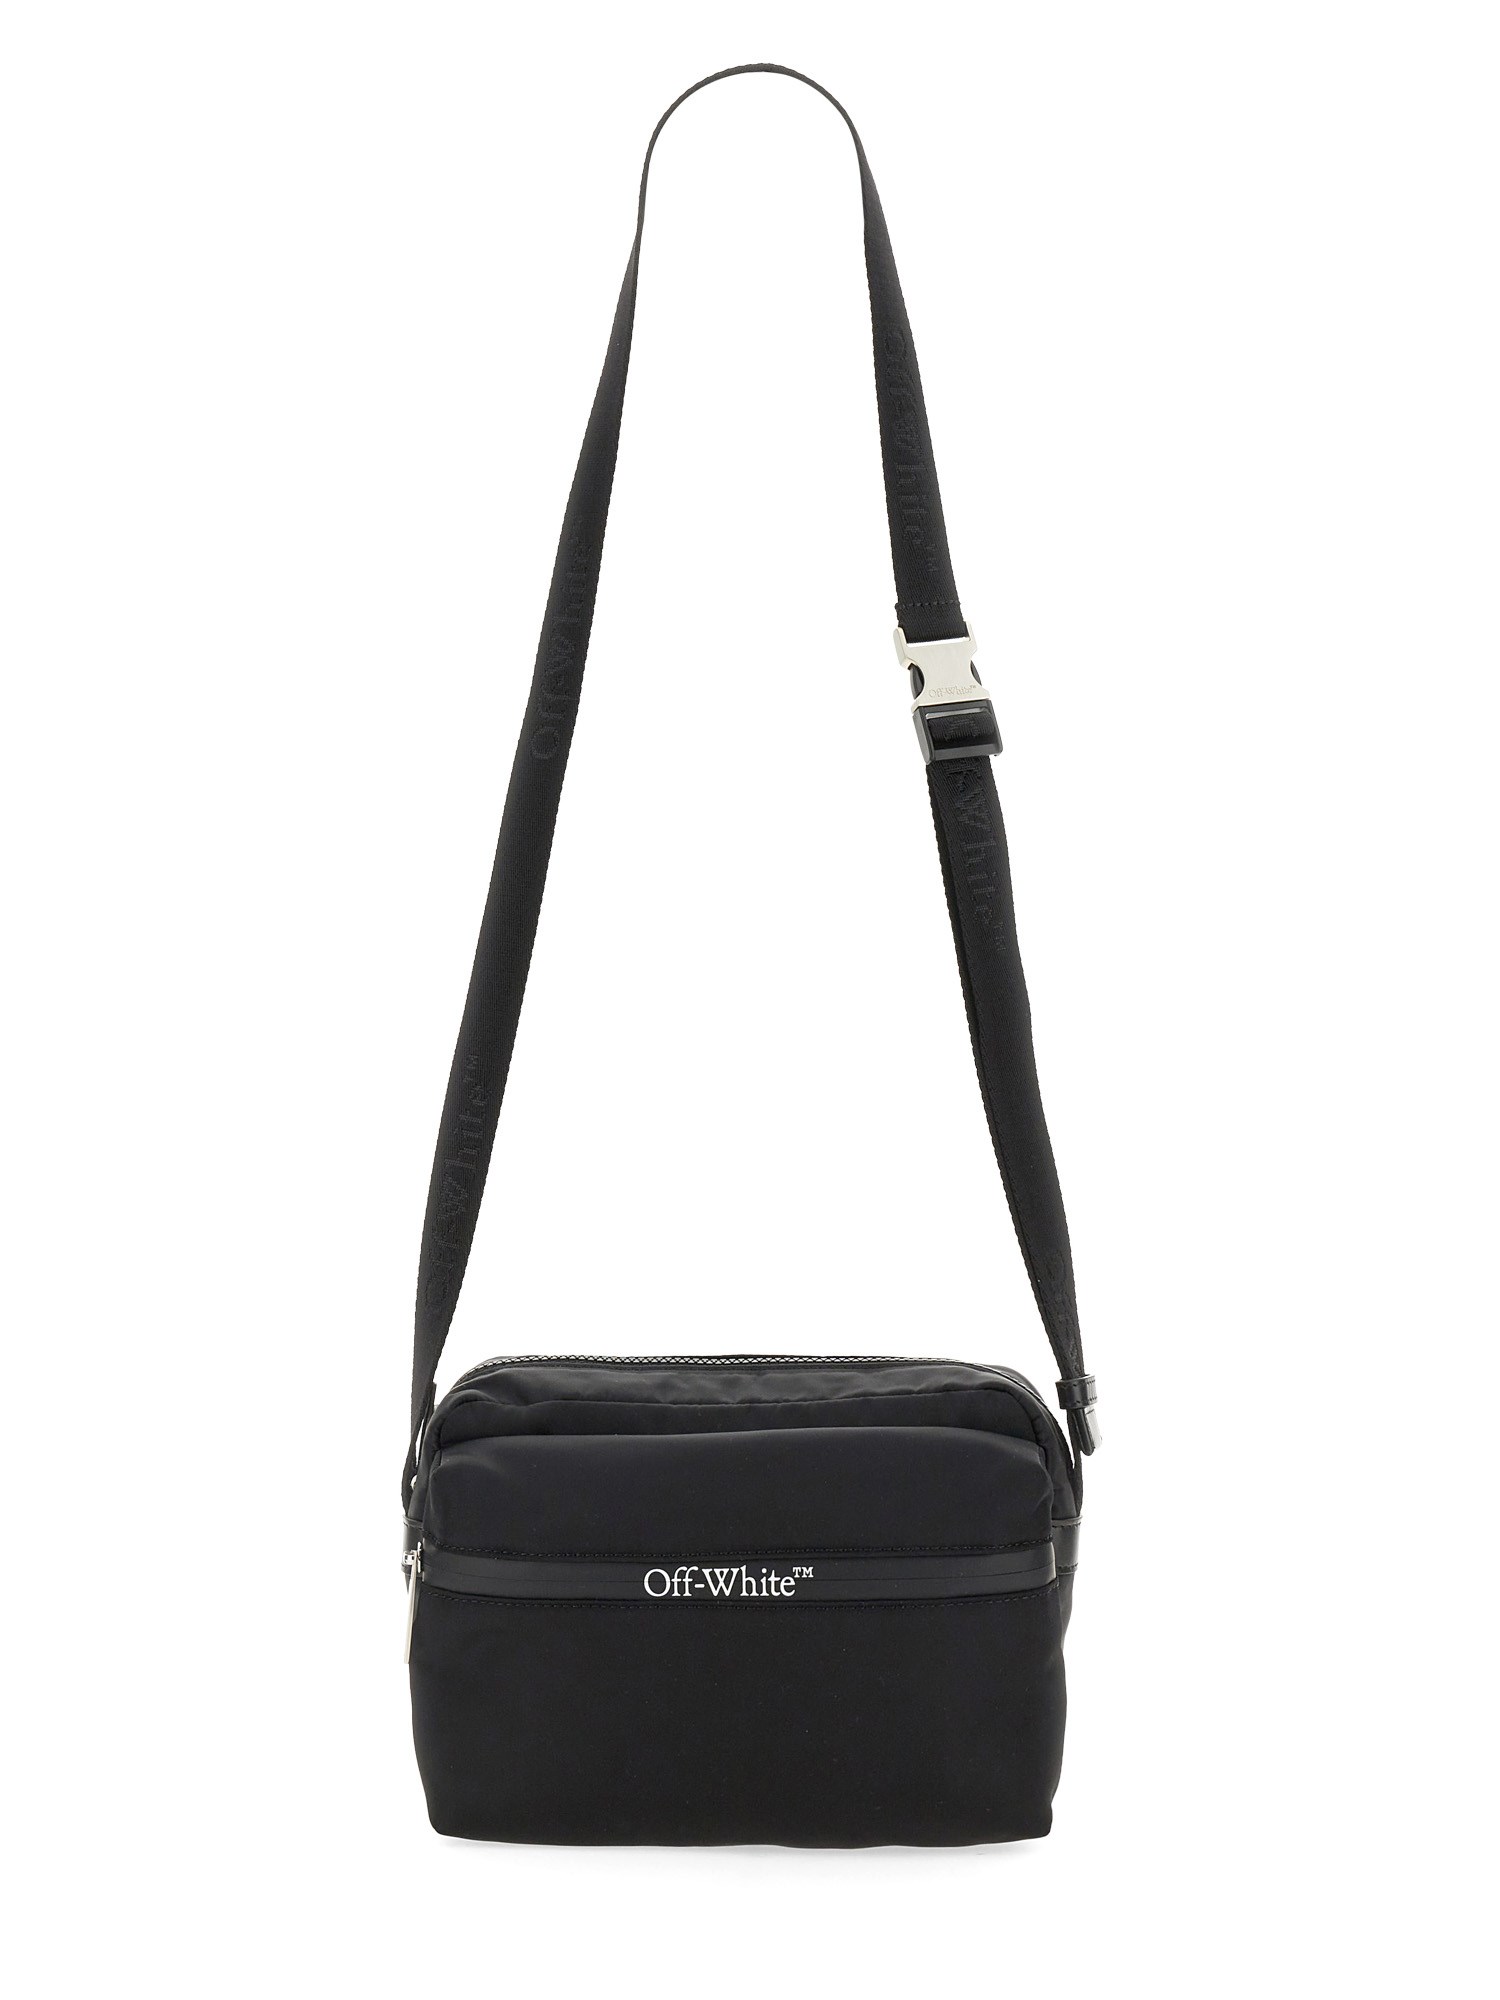 OFF-WHITE off-white camera bag with logo